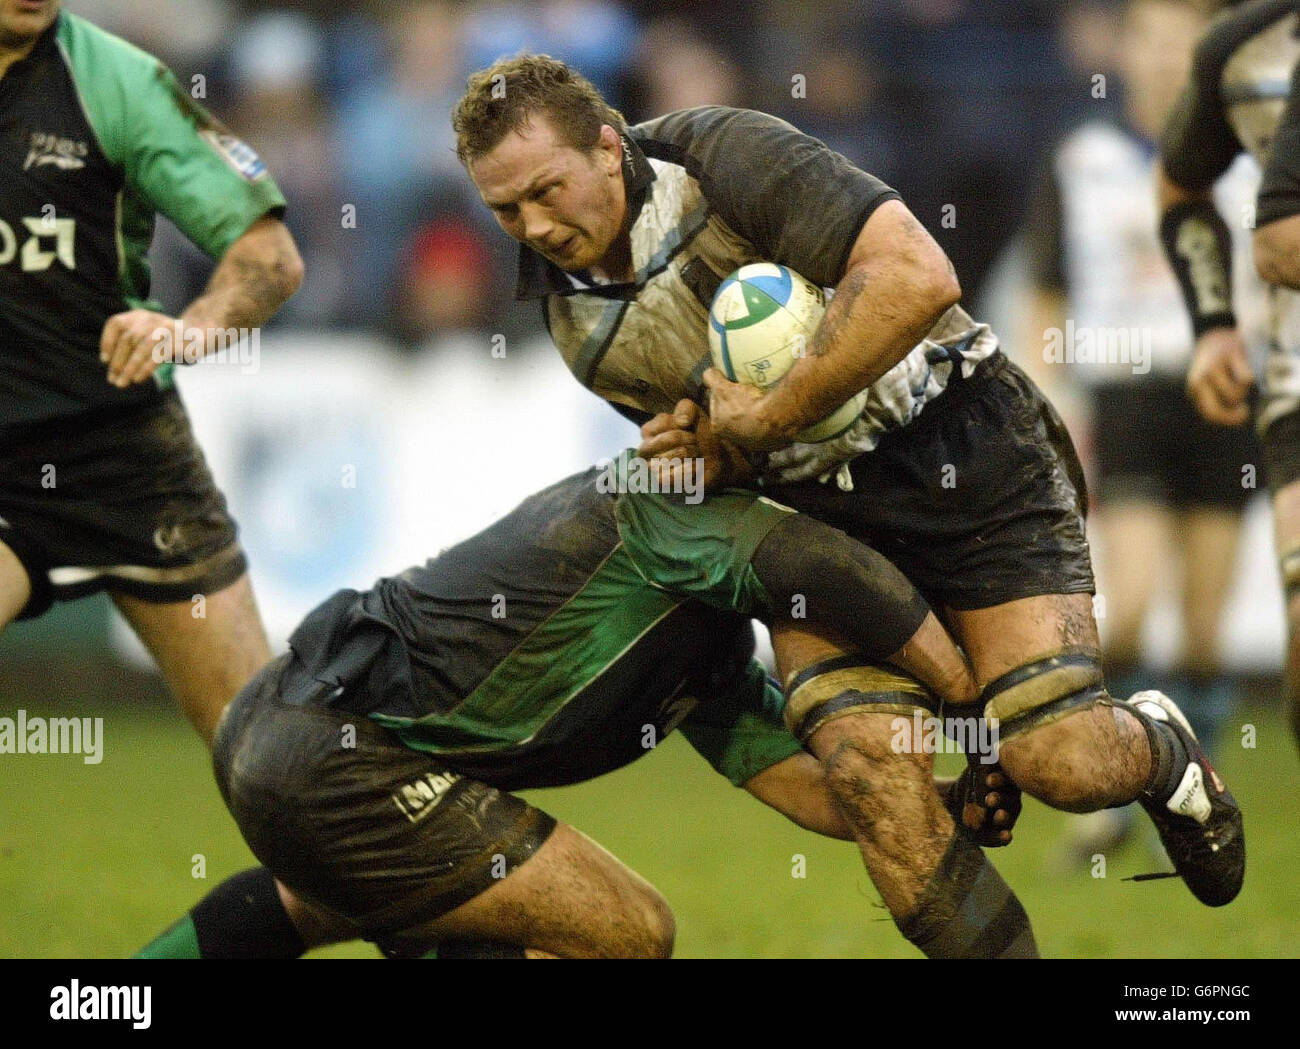 Cardiff's Nathan Thomas surges into the tackle of Sale's Braam van Straaten during today's Heineken Cup Pool 3 match at Cardiff Arms Park, Cardiff, Saturday 31st January 2004. Stock Photo